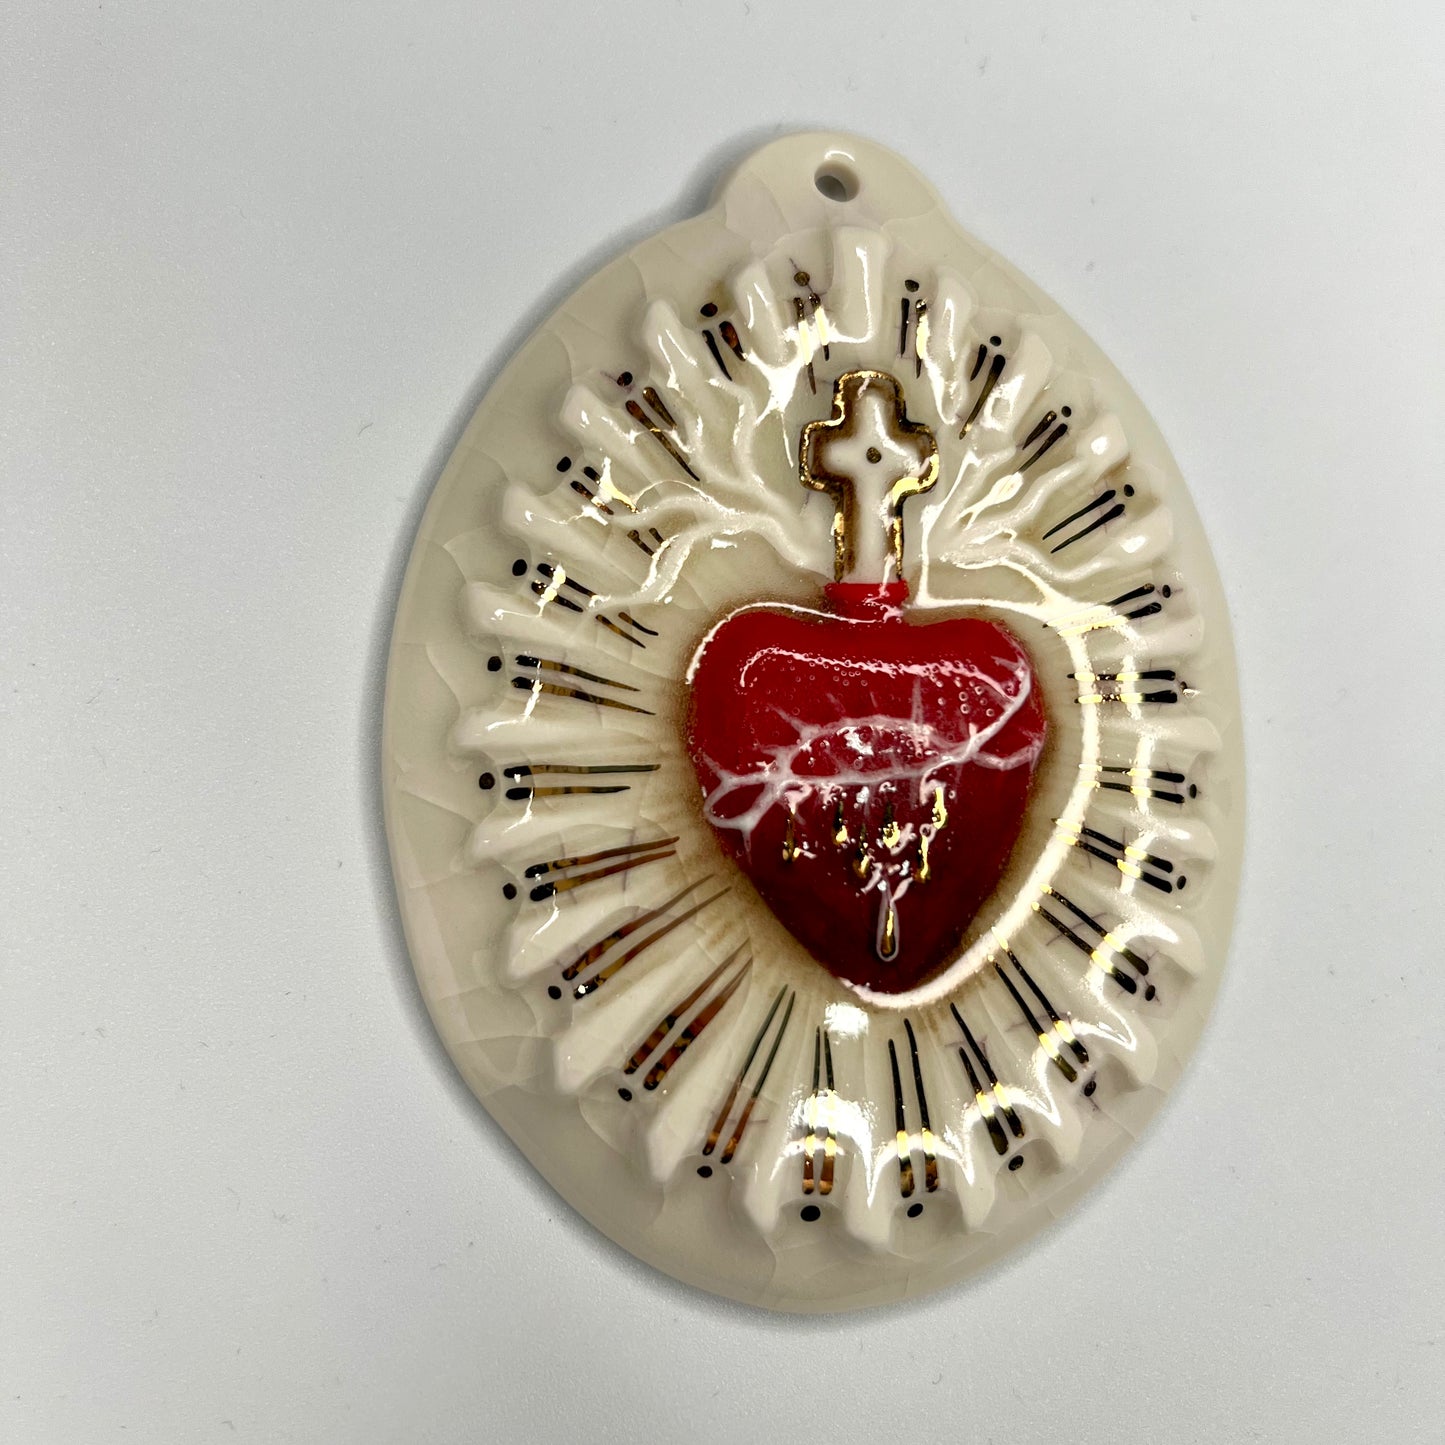 Product Image: Sacred Heart 3 - Hand crafted Porcelain Home Ornament. Red Sacred Heart in thorns.